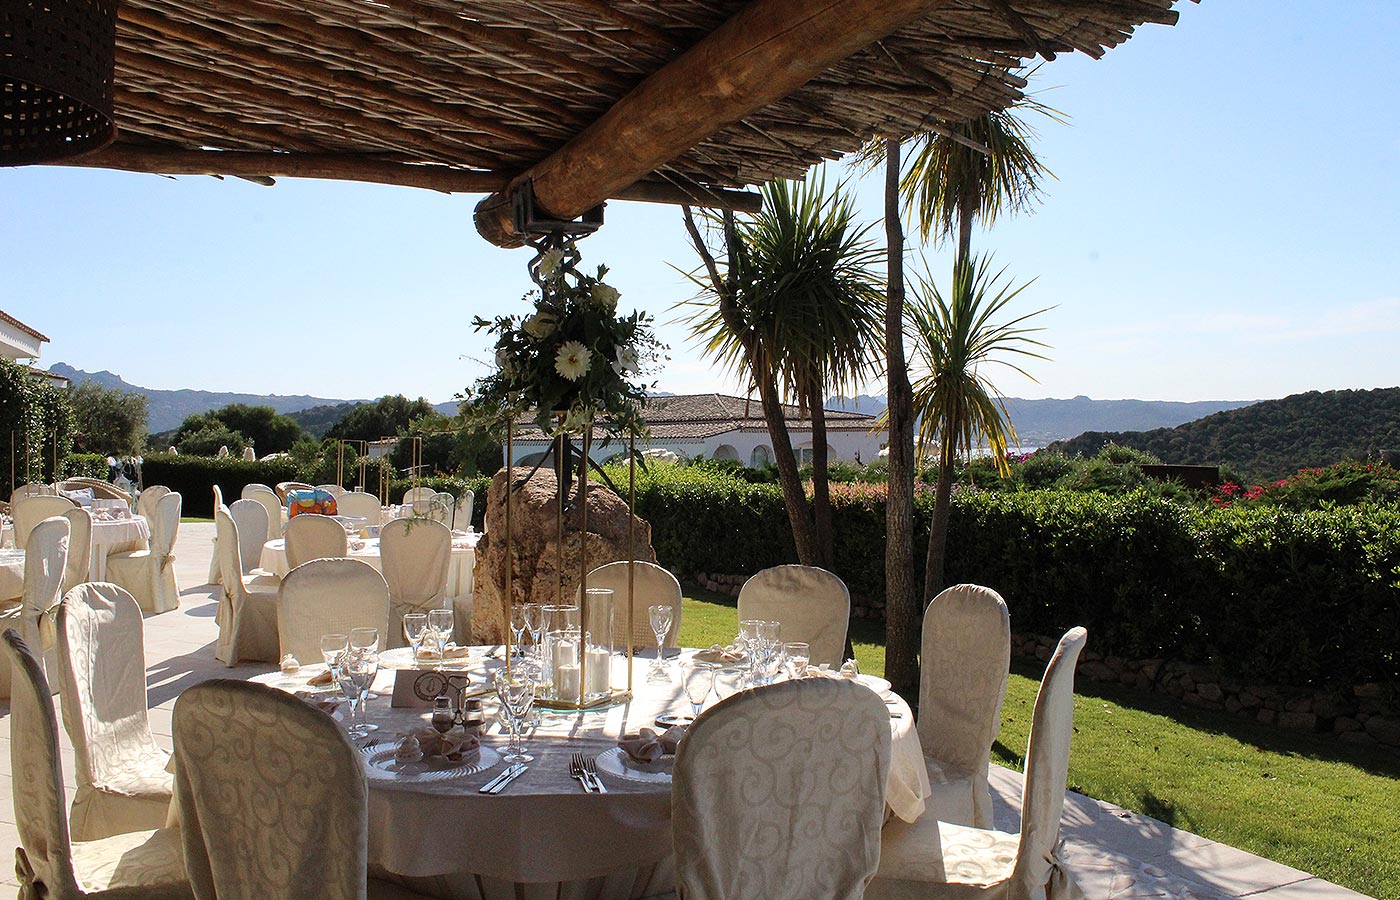 tables prepared for a wedding party at Hotel Pulicinu in Sardinia 